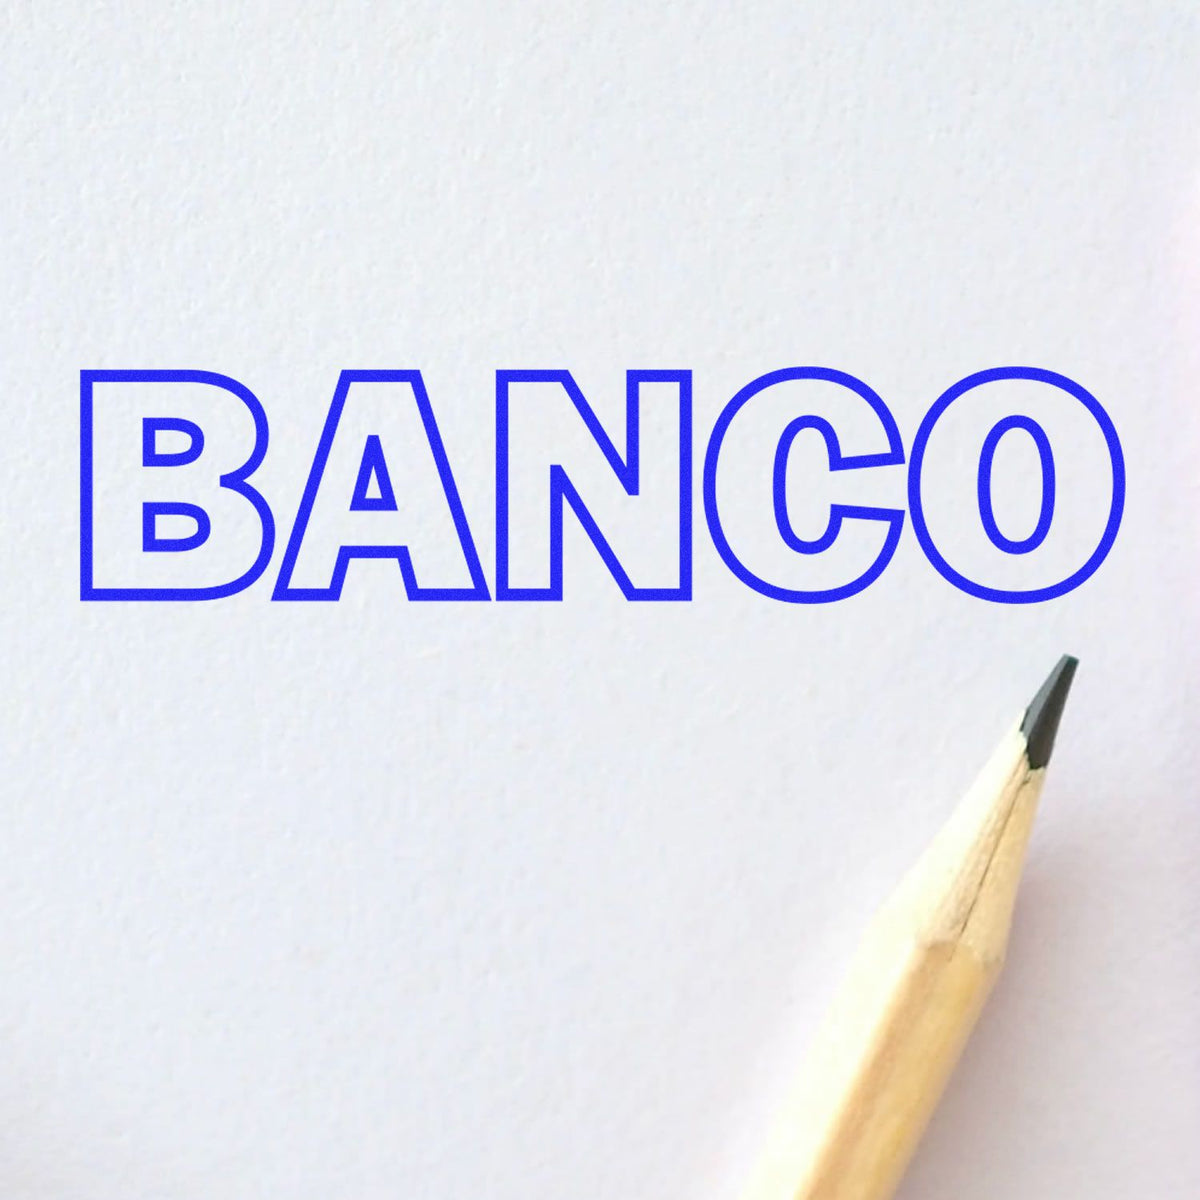 Banco Rubber Stamp In Use Photo